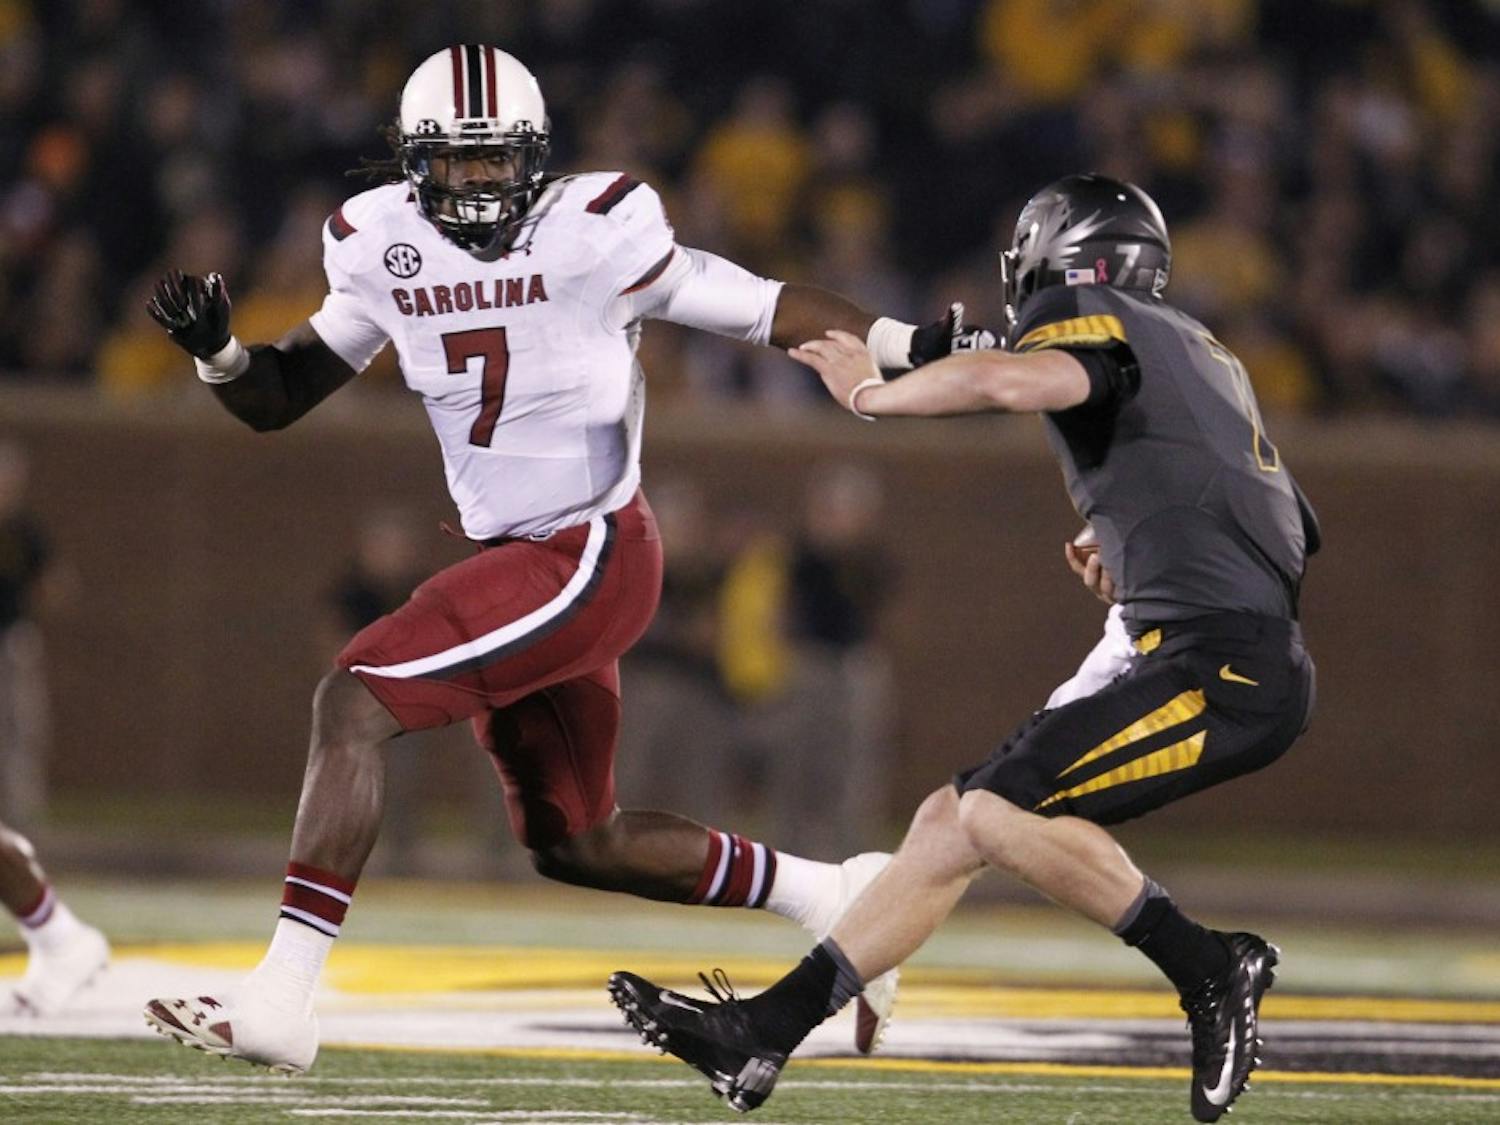 South Carolina Gamecocks defensive end Jadeveon Clowney (7) pressures Missouri Tigers quarterback Maty Mauk (7) in the second quarter at Memorial Stadium's Faurot Field in Columbia, Missouri, on Saturday, October 26, 2013. (Gerry Melendez/The State/MCT)